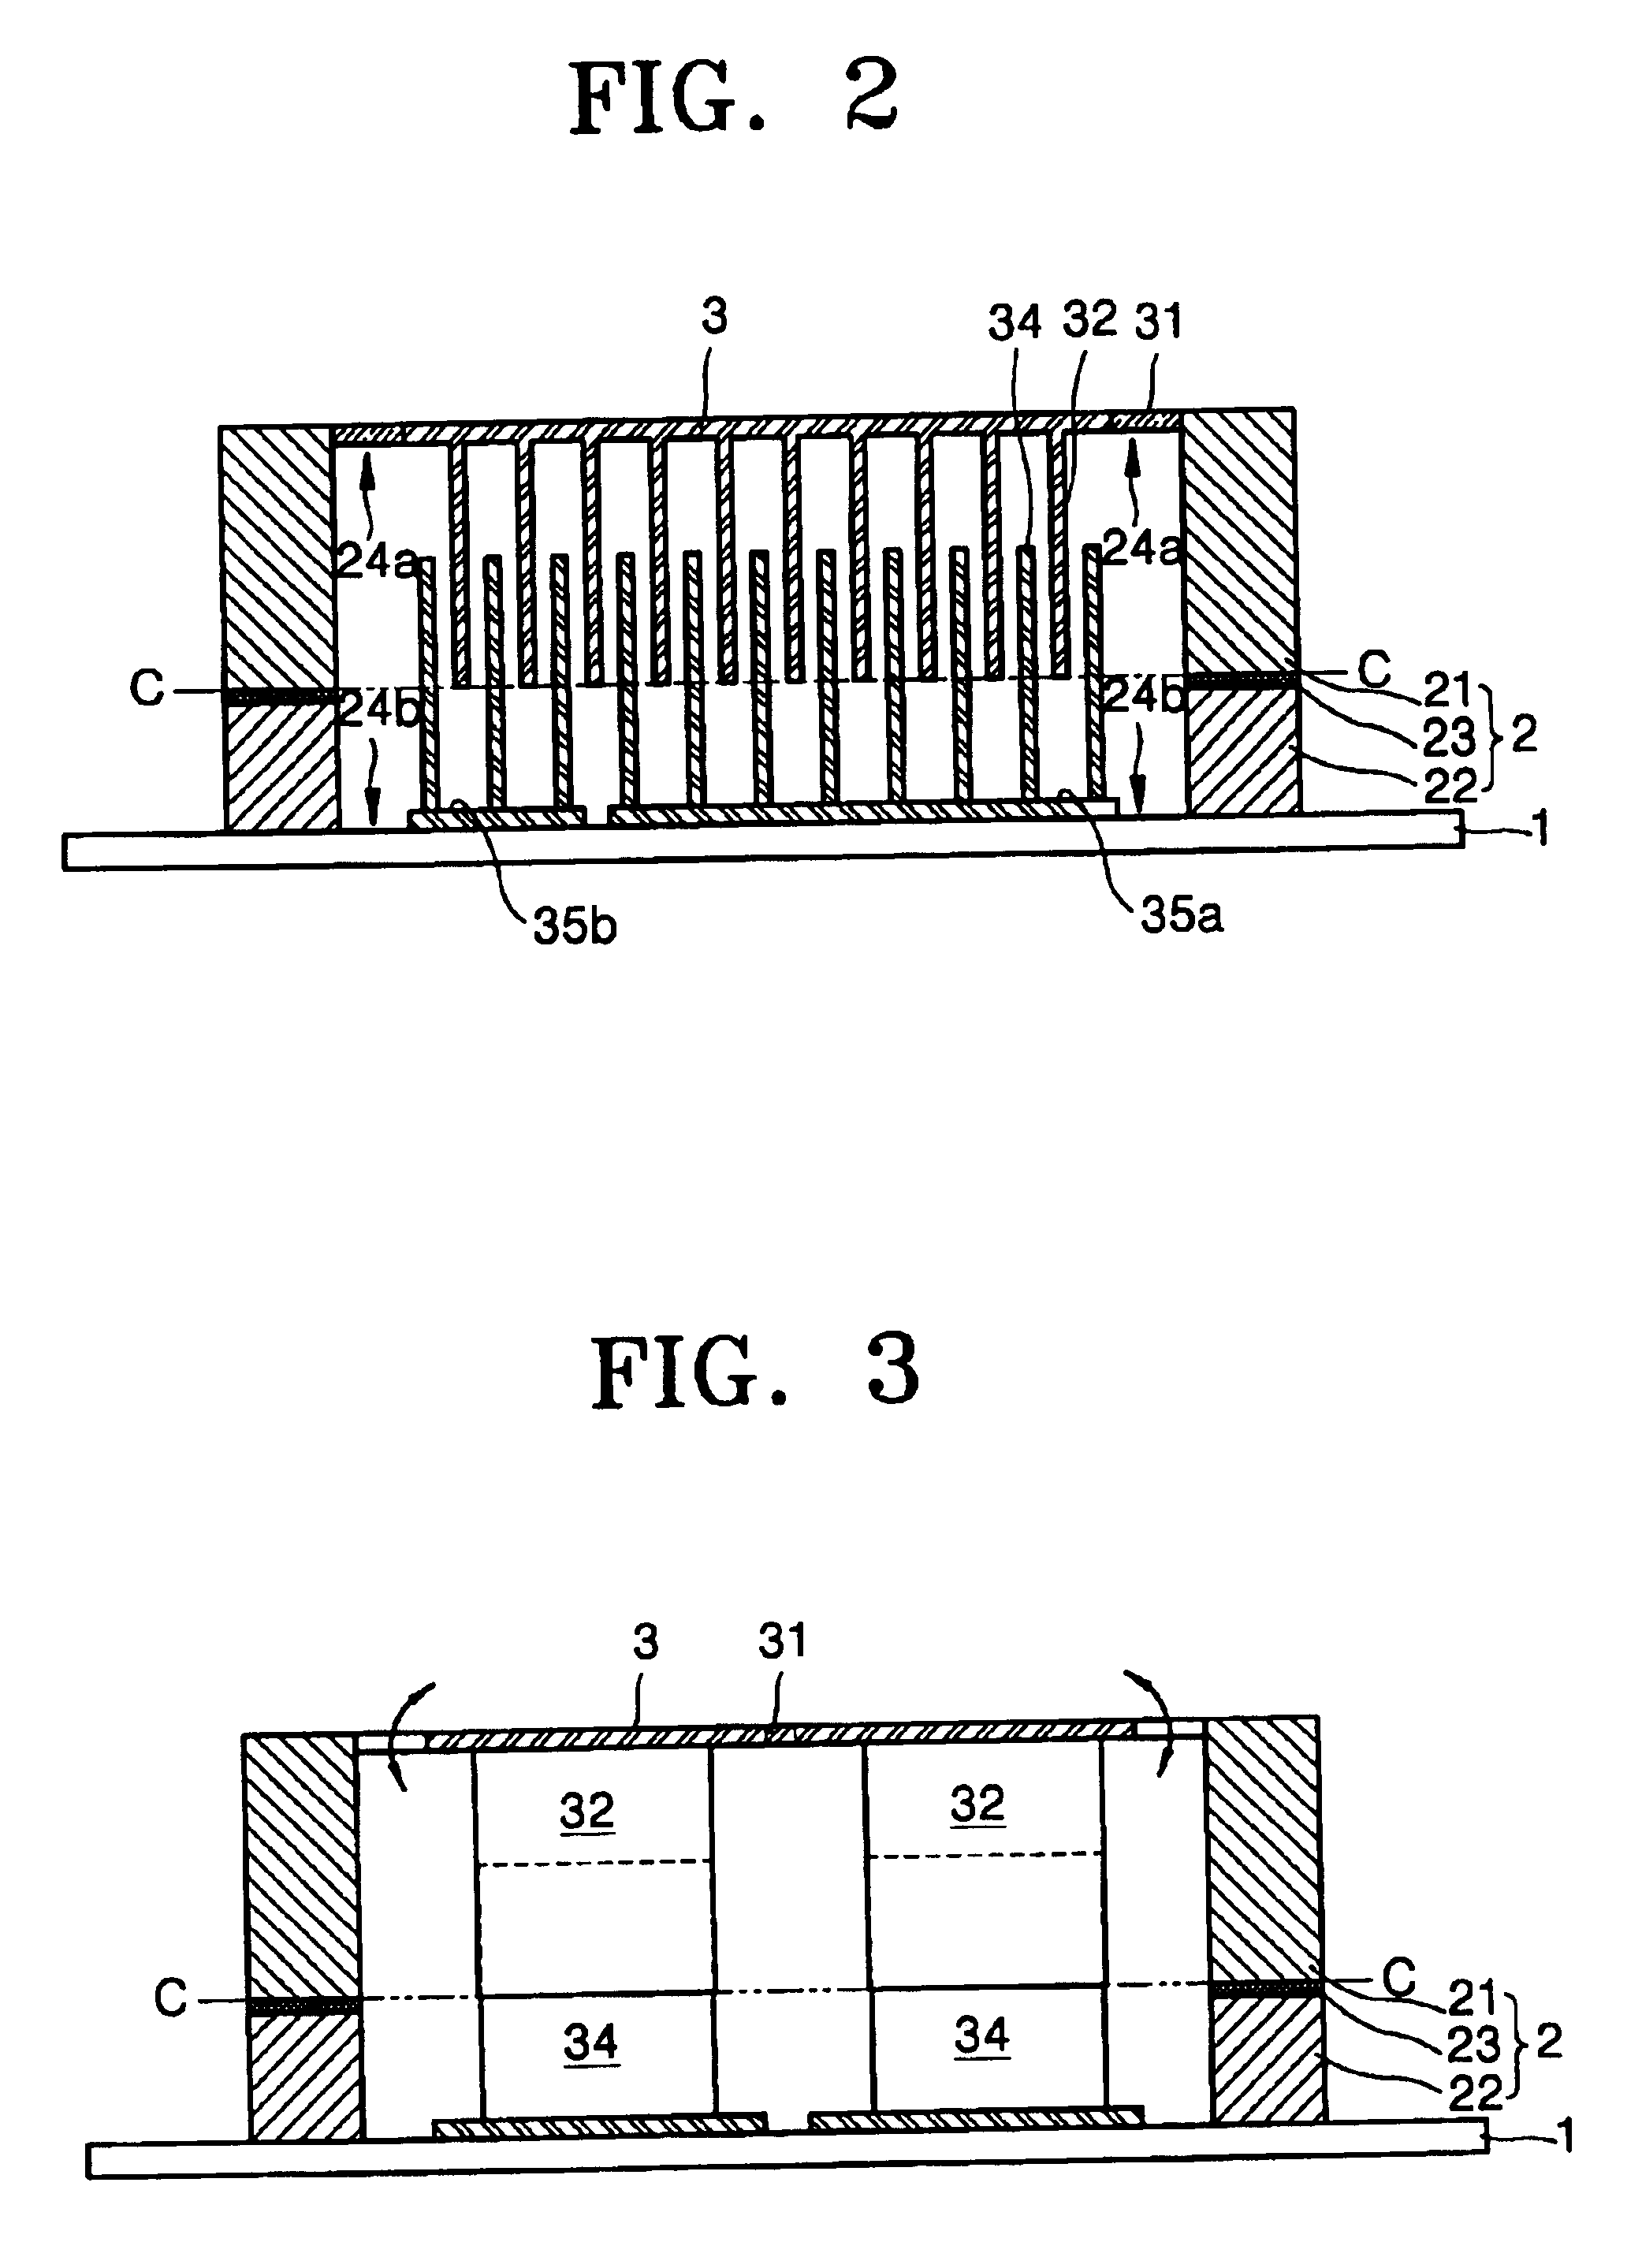 Micro-actuator with interdigitated combs perpendicular to a base